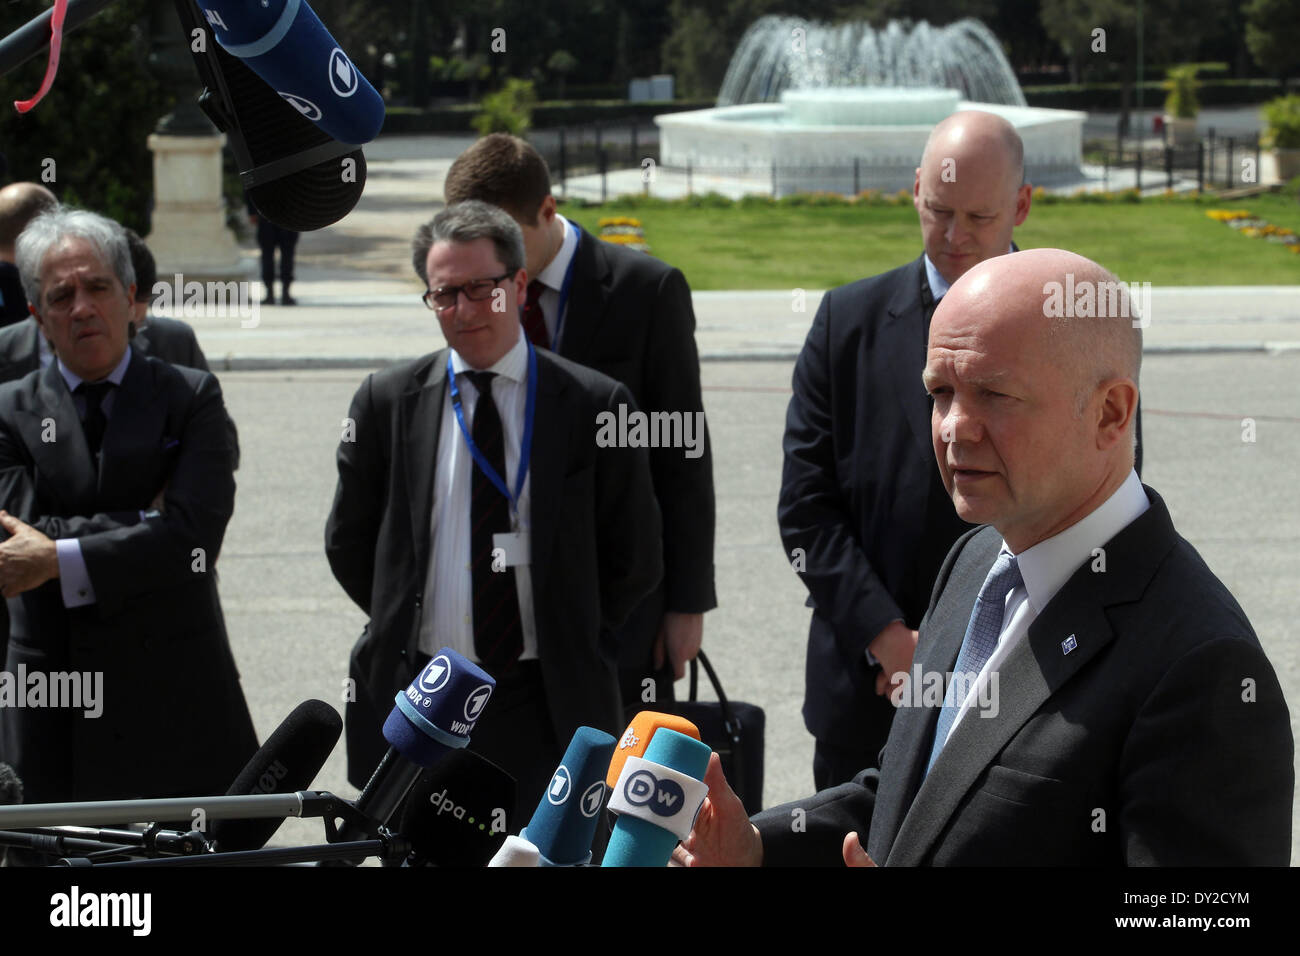 Athens, Greece. 4th Apr, 2014. Britain's Foreign Secretary William Hague speaks to the press as he arrives for the Informal Meeting of Foreign Affairs Ministers at the Zappeion Hall in Athens, capital of Greece, on April 4, 2014. © Marios Lolos/Xinhua/Alamy Live News Stock Photo